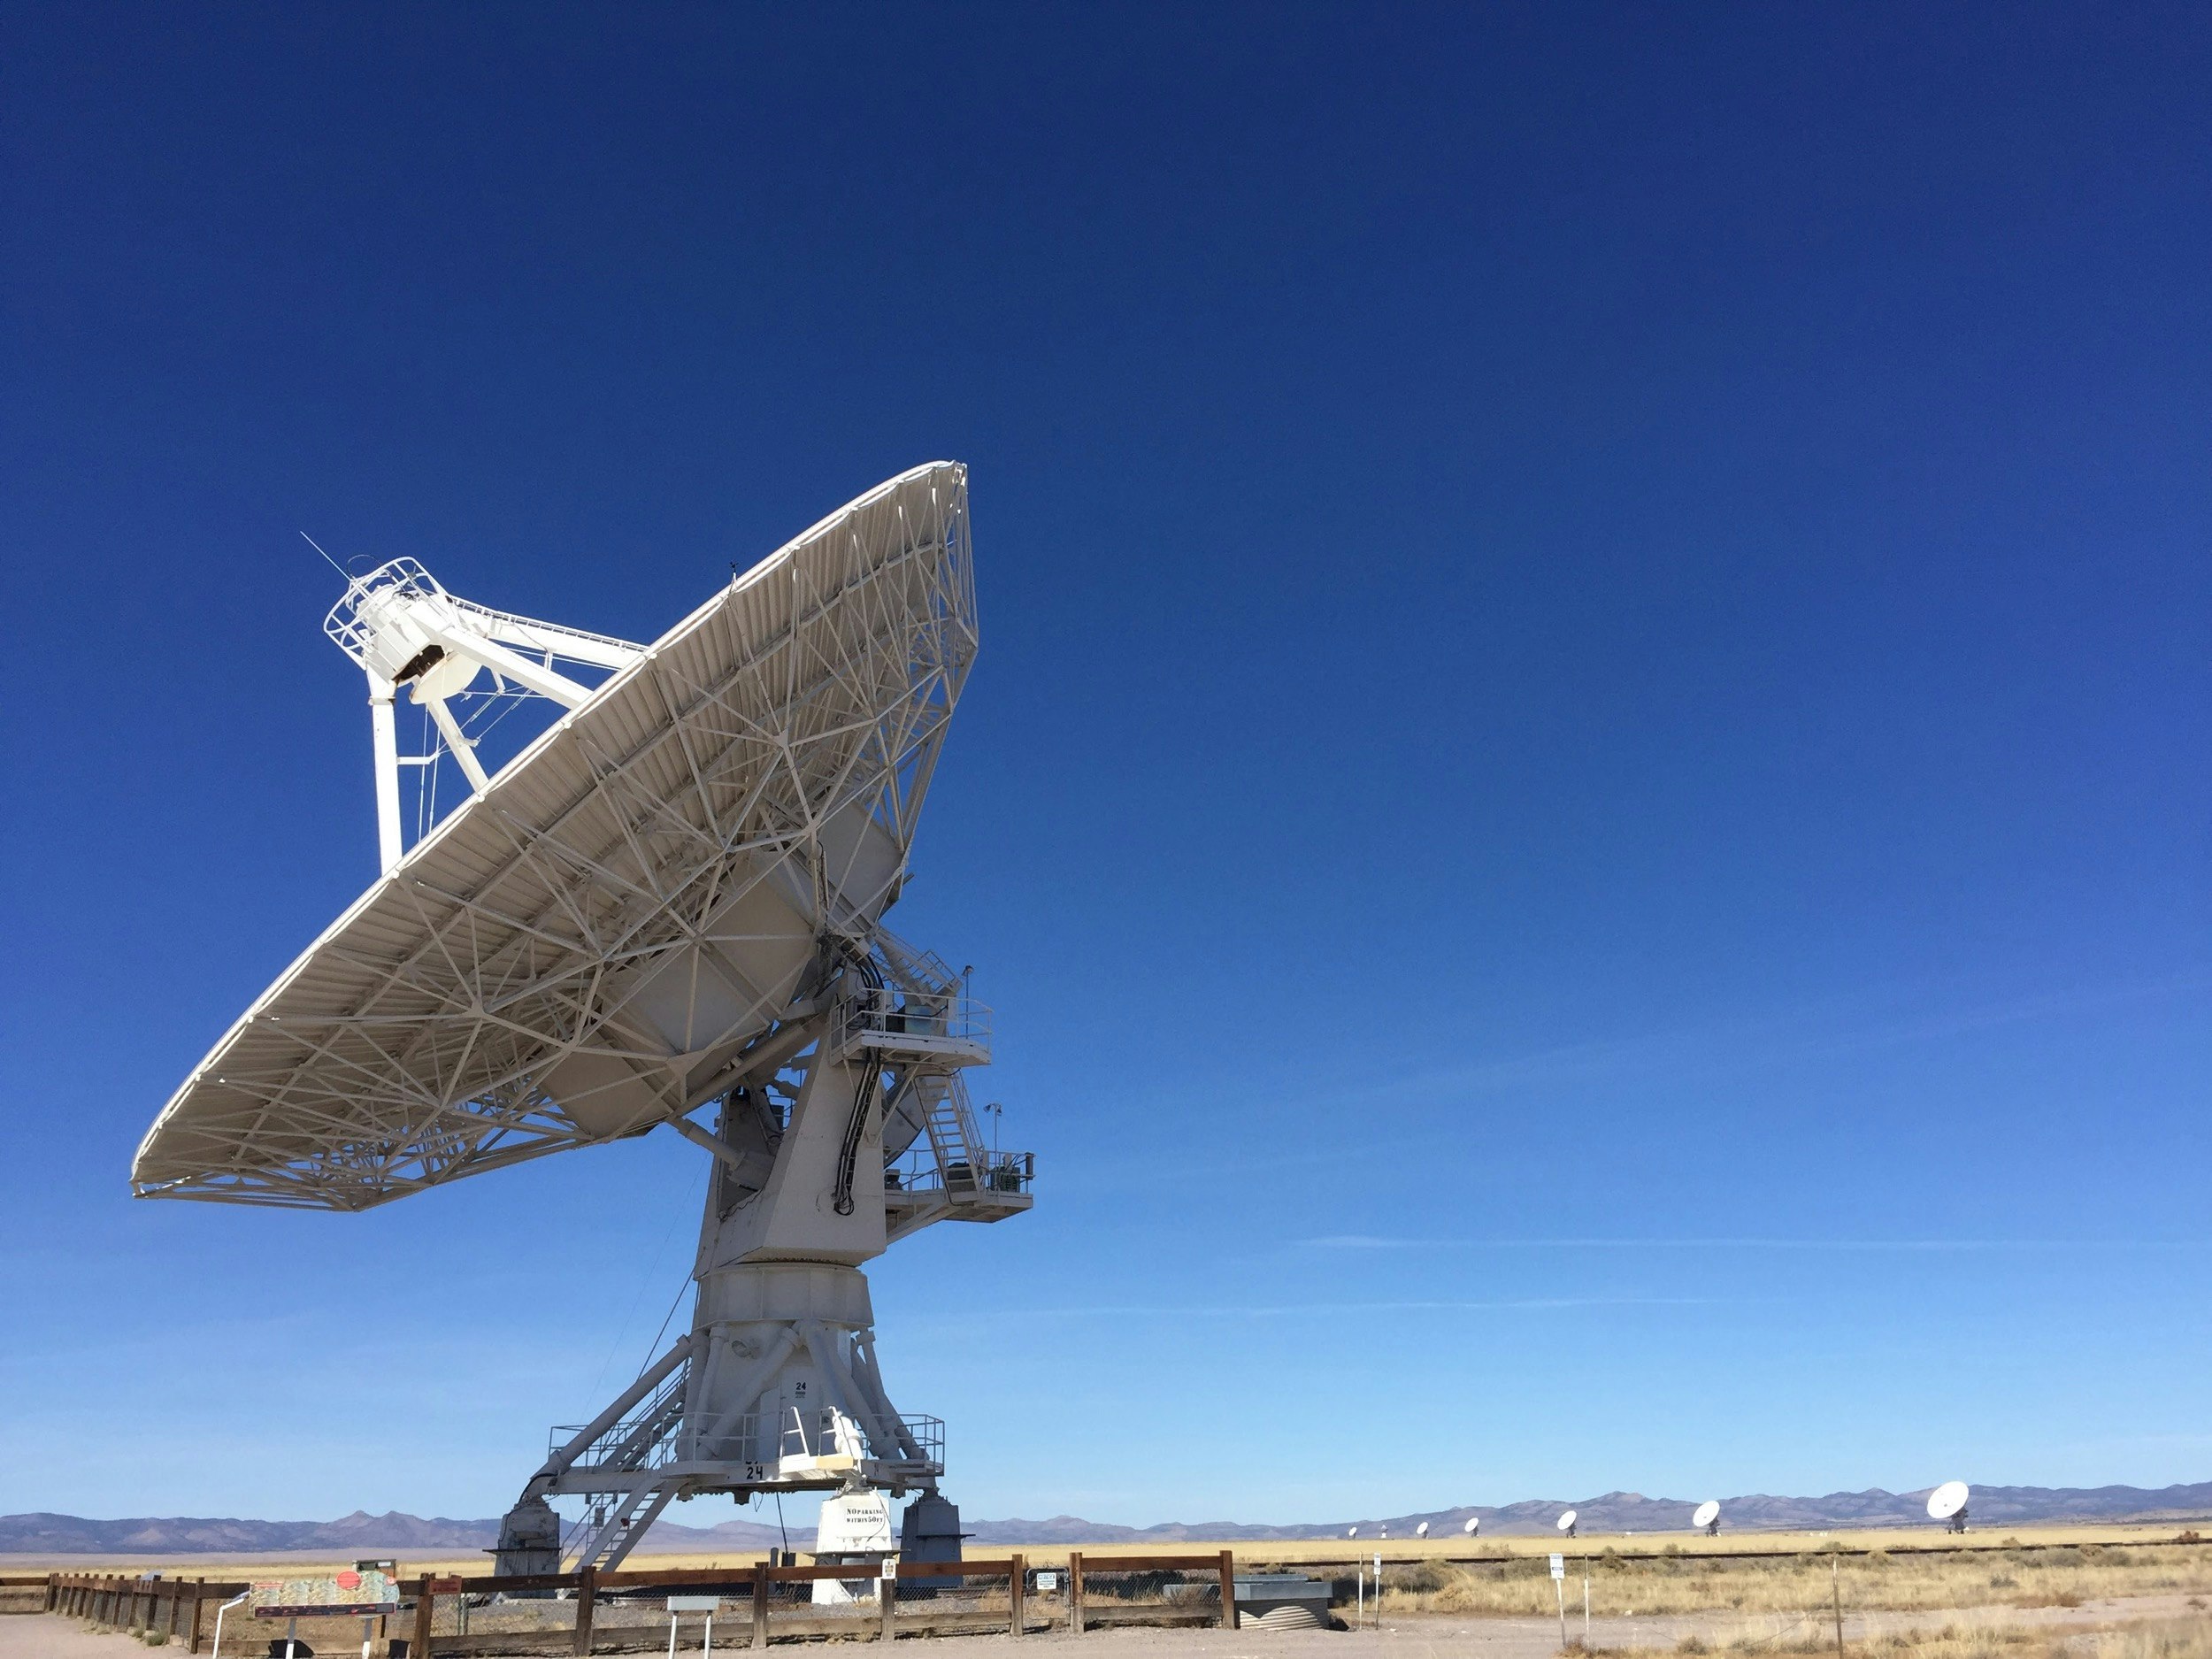 A large white radio dish stands out on a deep blue sky